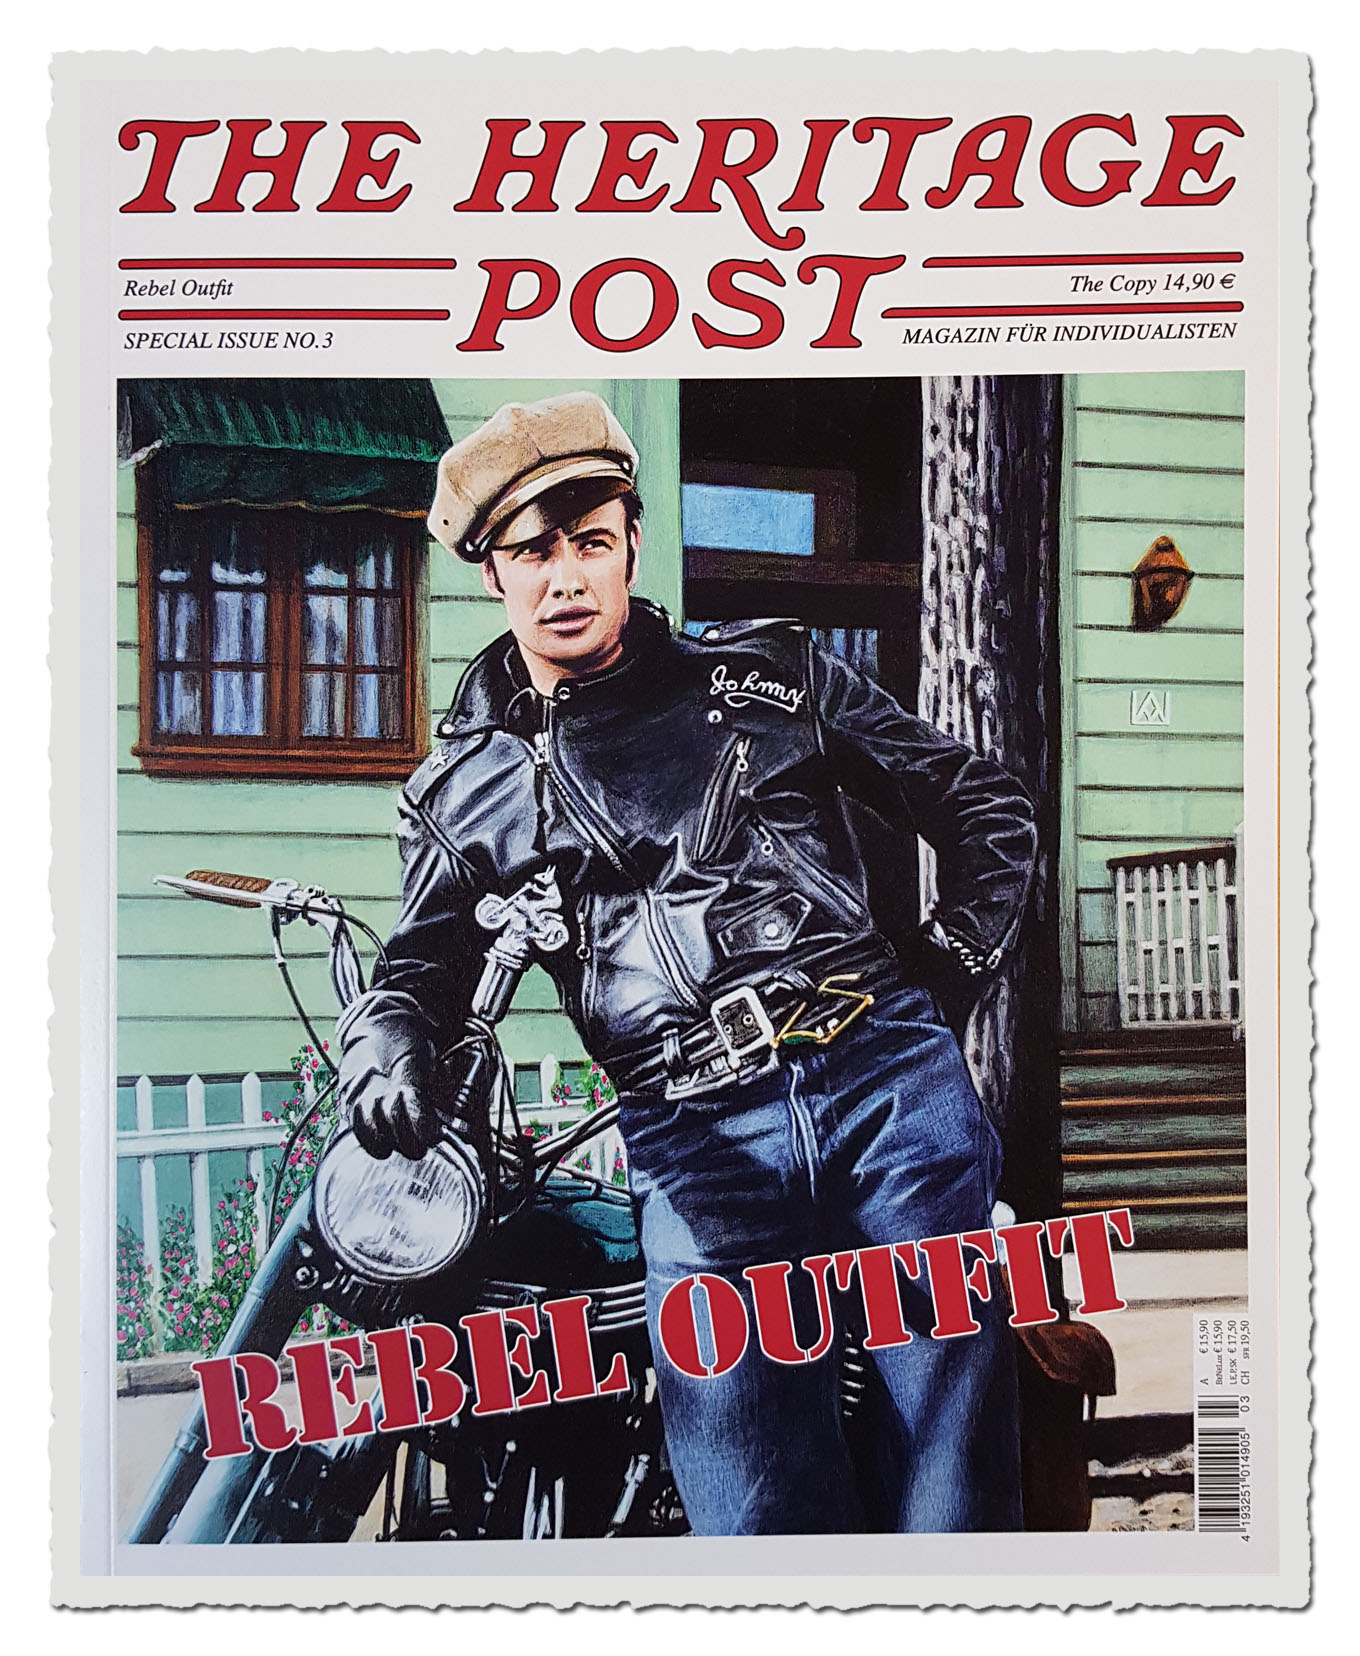 The Heritage Post - Special Issue No. 3